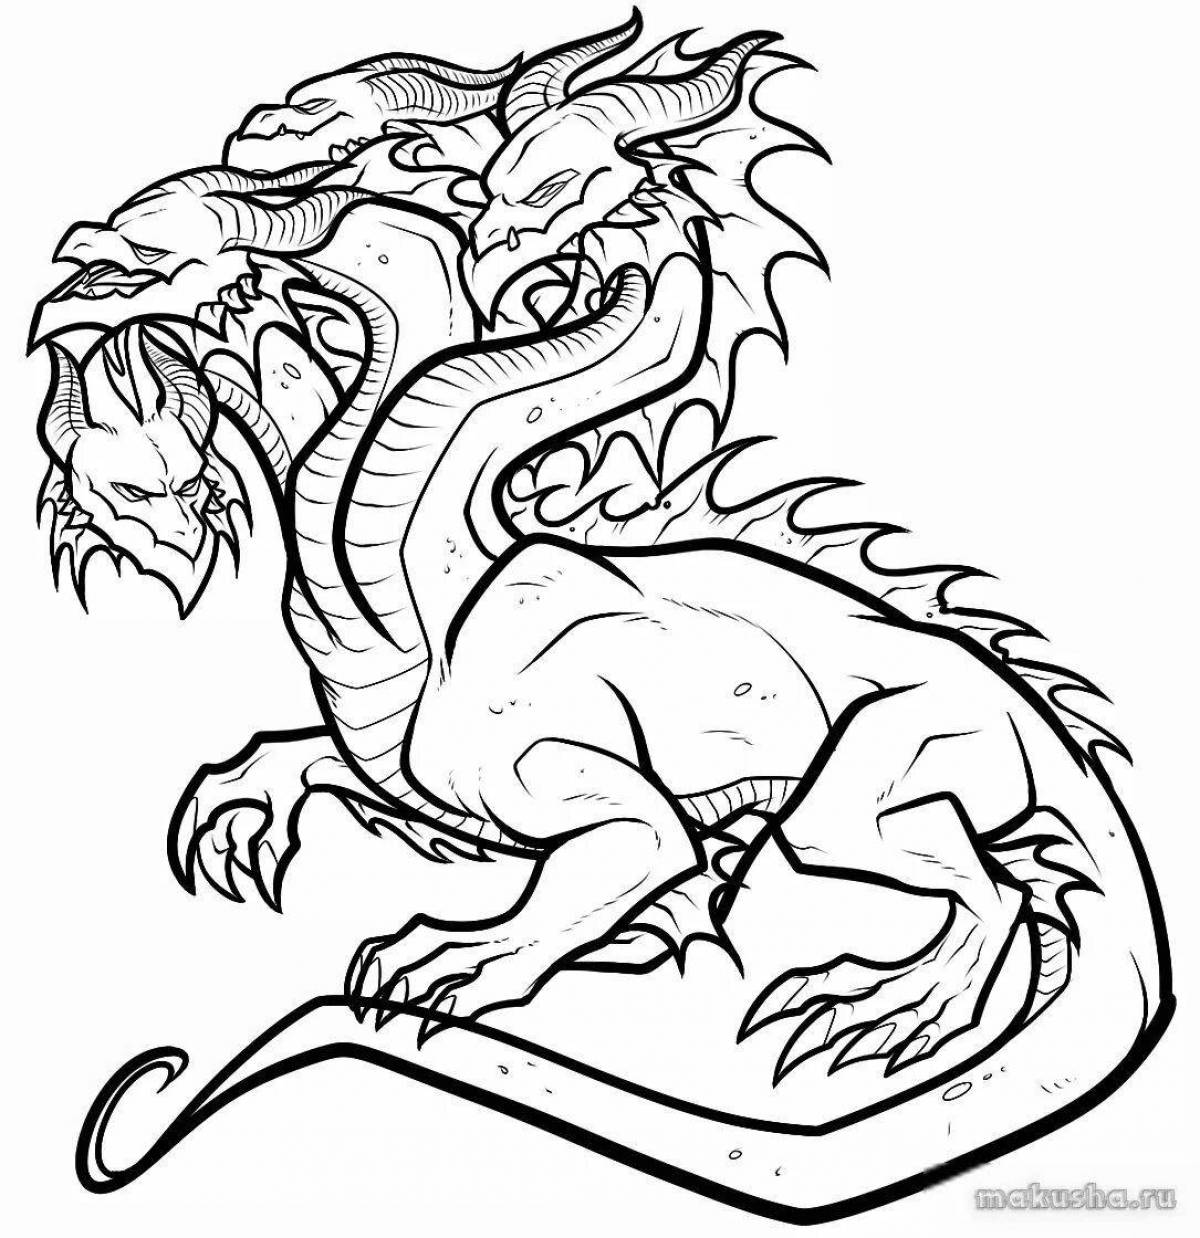 Majestic six-headed serpent coloring page